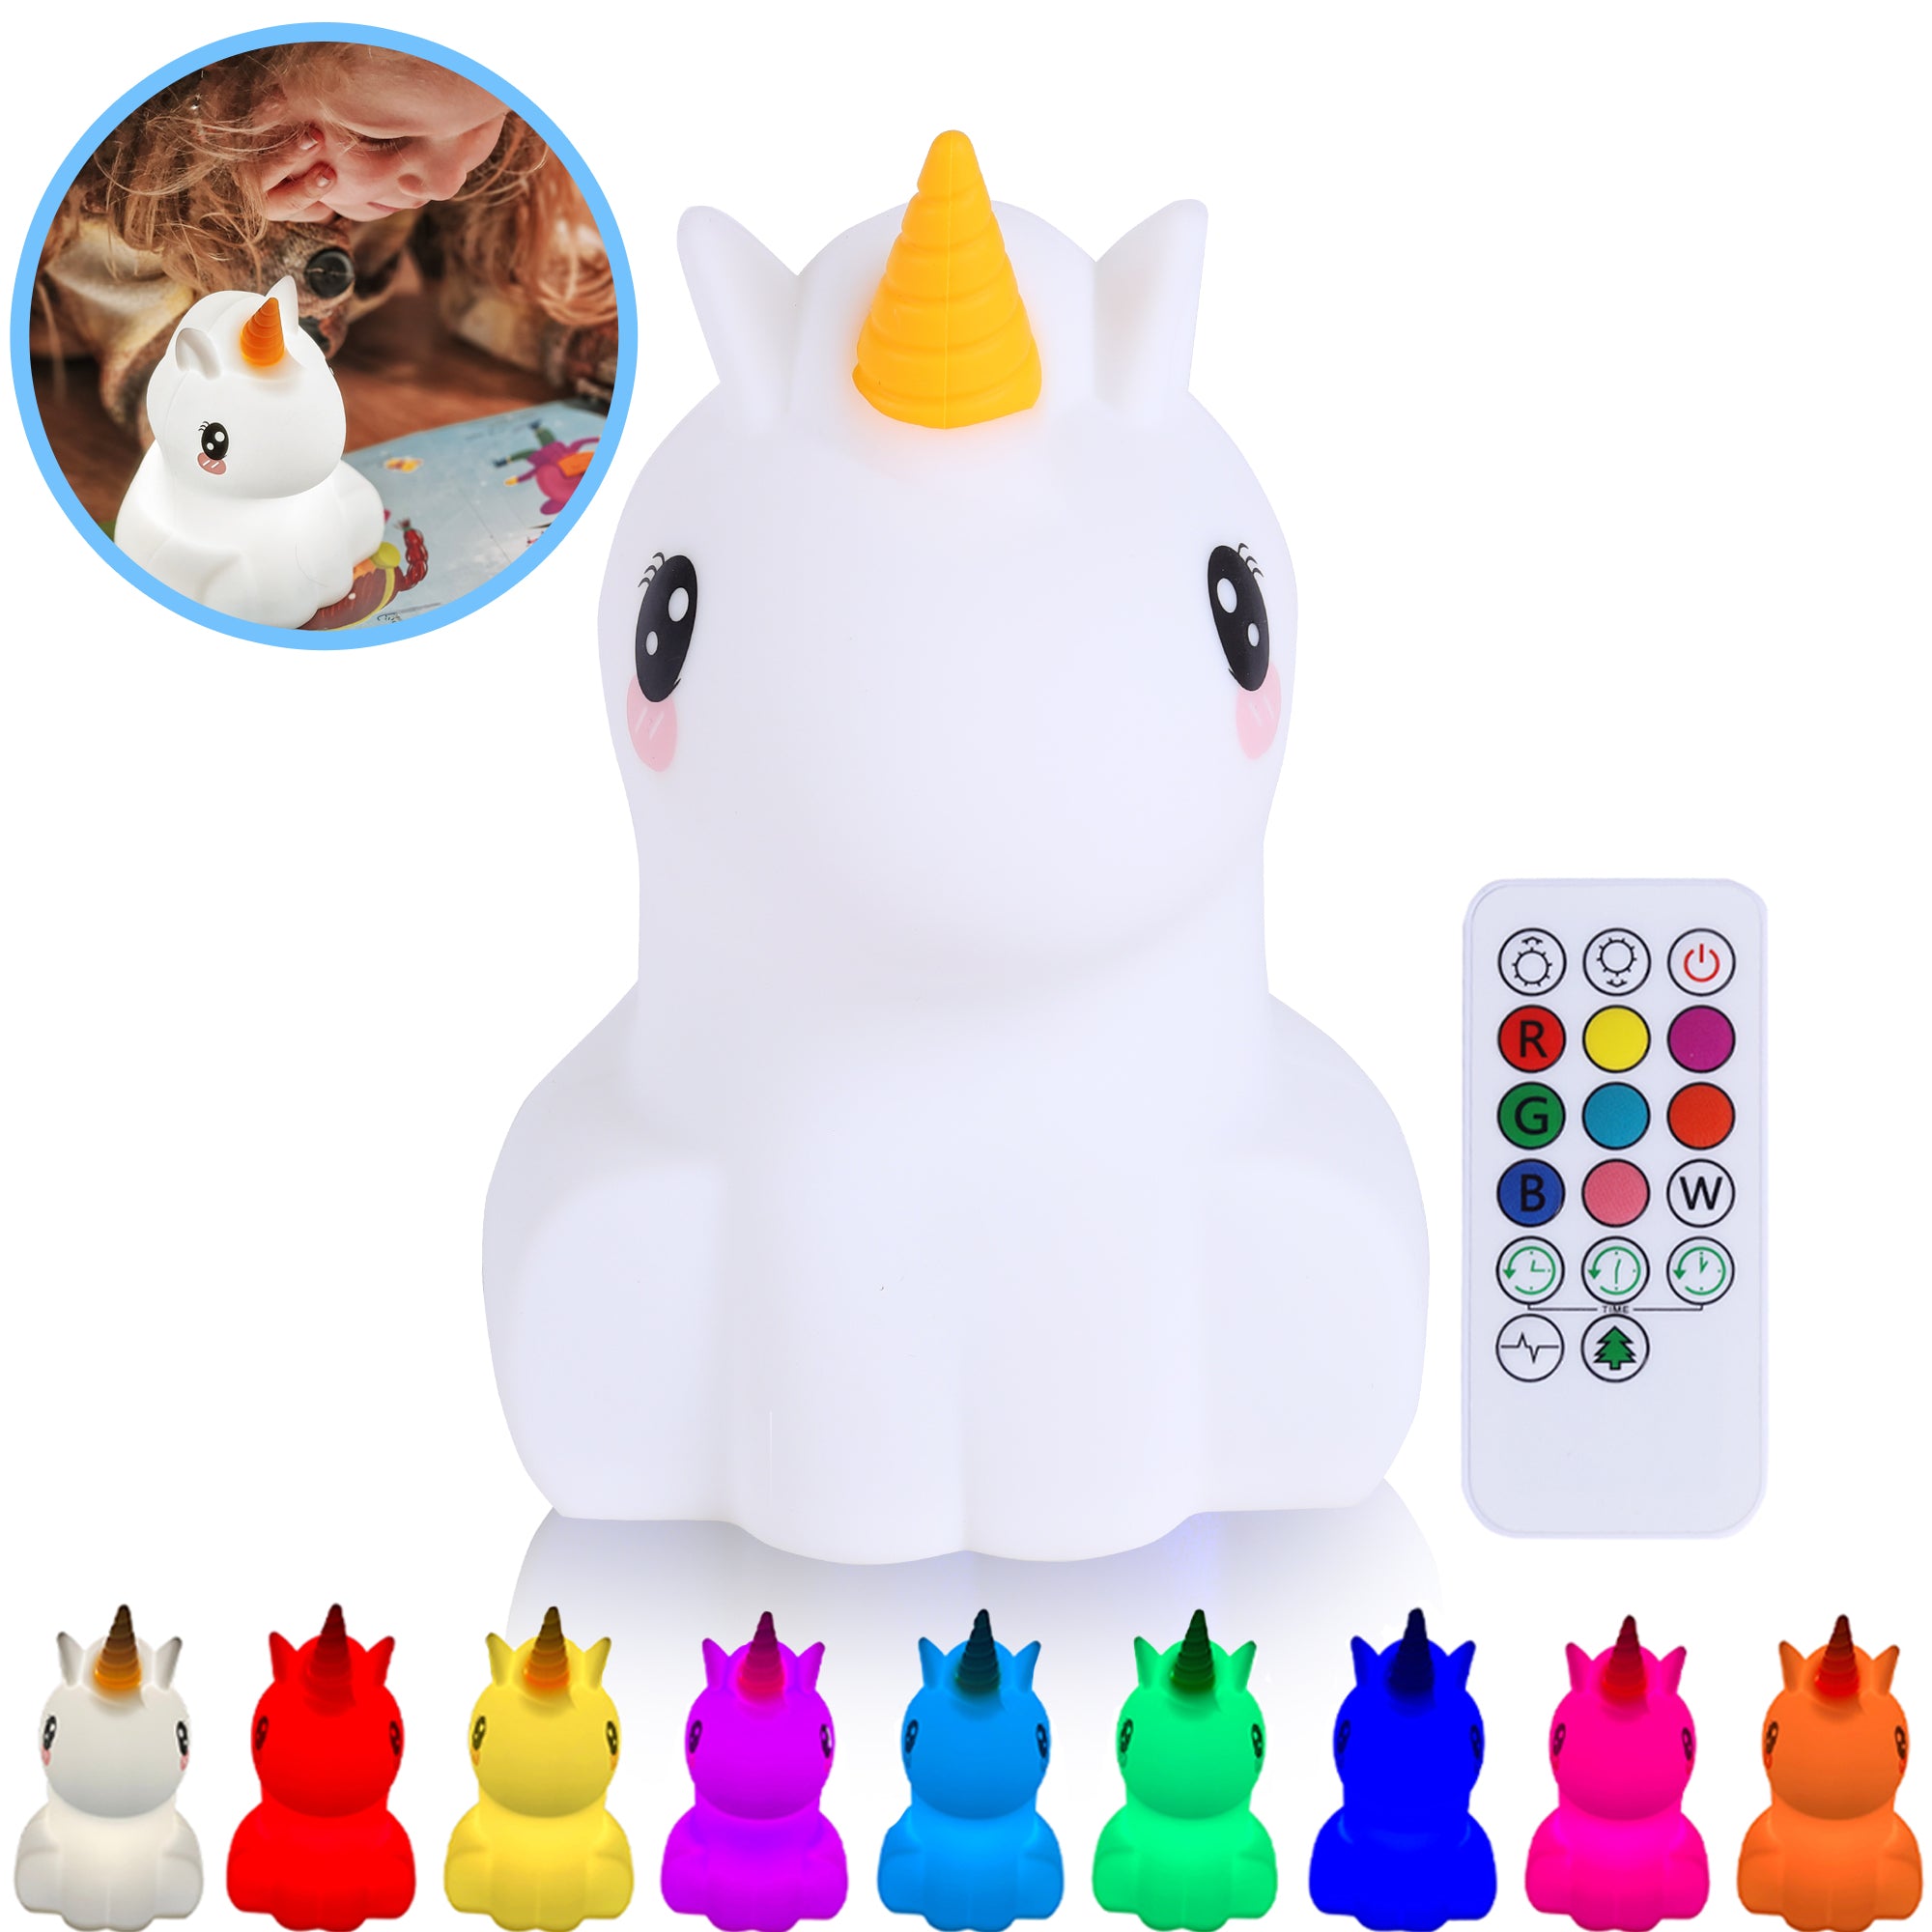 Unicorn Night Lamp with Remote Control & TAP-ON function